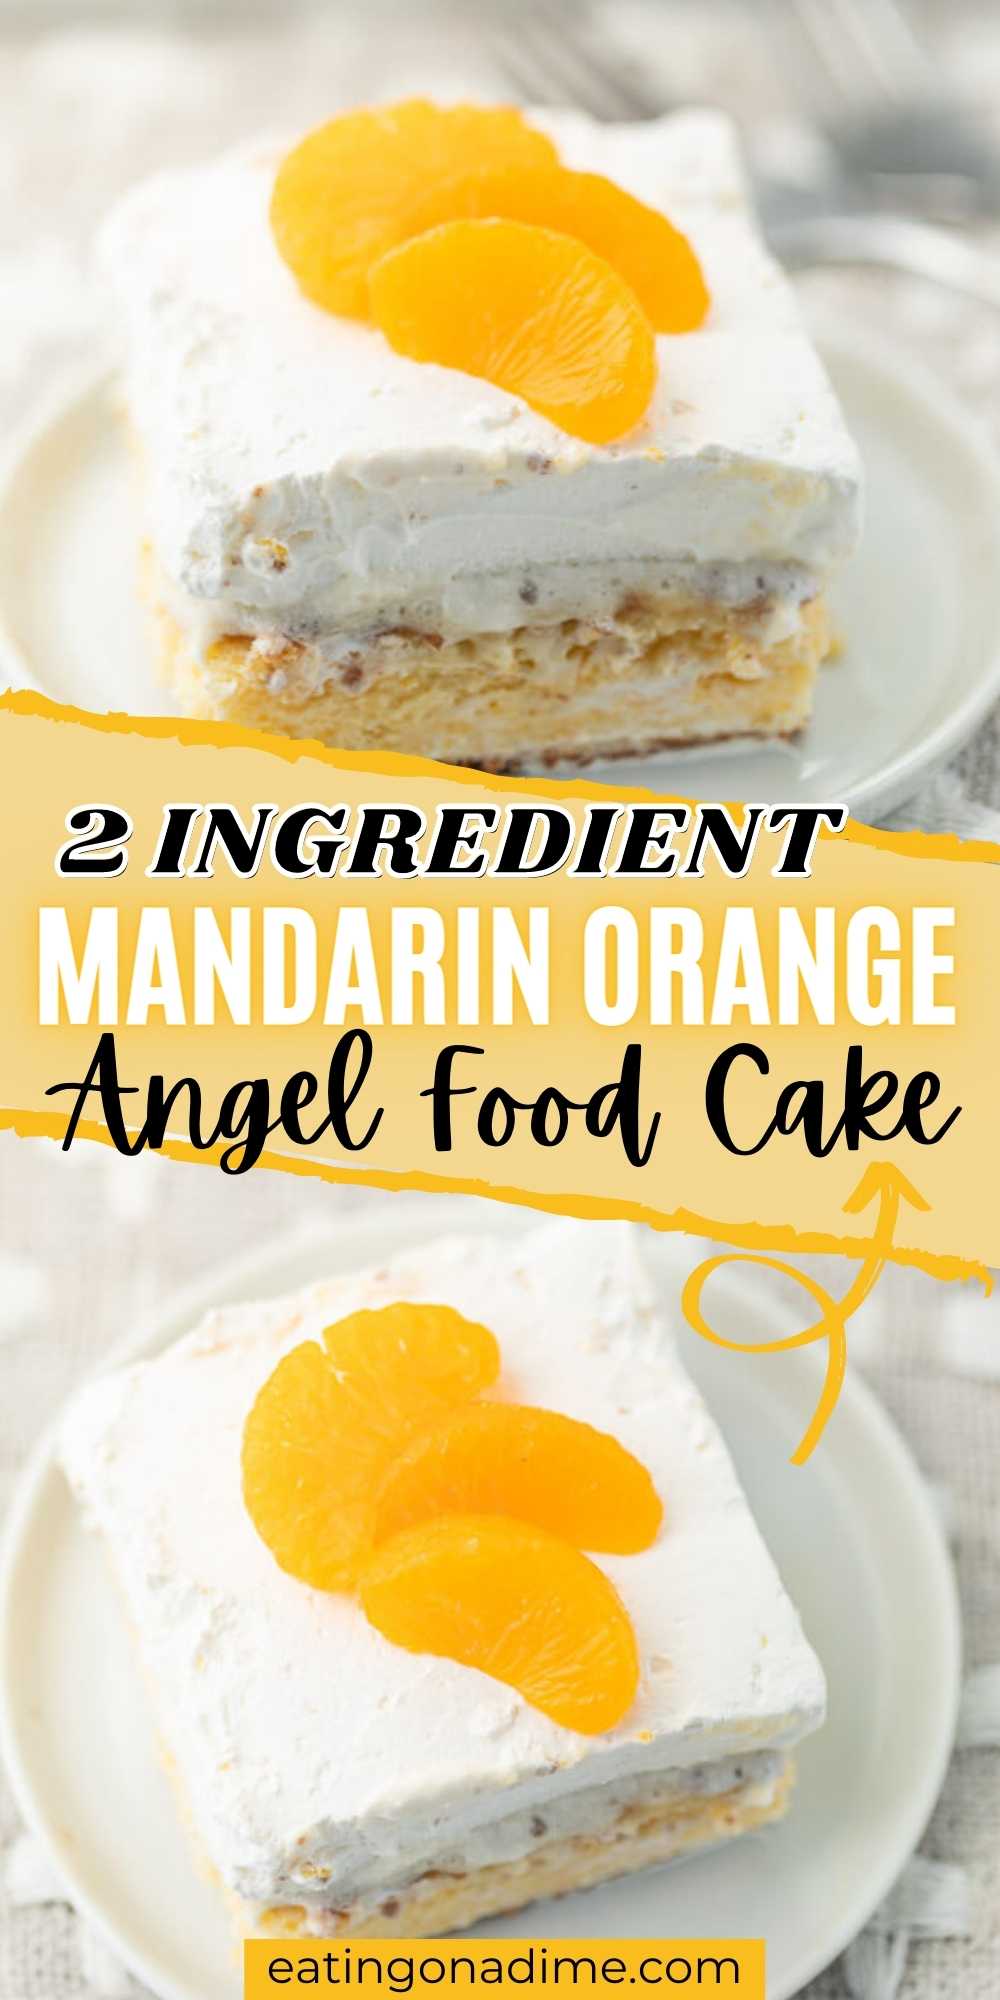 Just 2 ingredients is all you need for for this mandarin orange angel food cake recipe. Super moist and can be thrown together in minutes. This is the easiest orange cake ever.  Everyone loves this easy to make cake recipe.  #eatingonadime #cakerecipes #angelfoodcake #orangerecipes 
